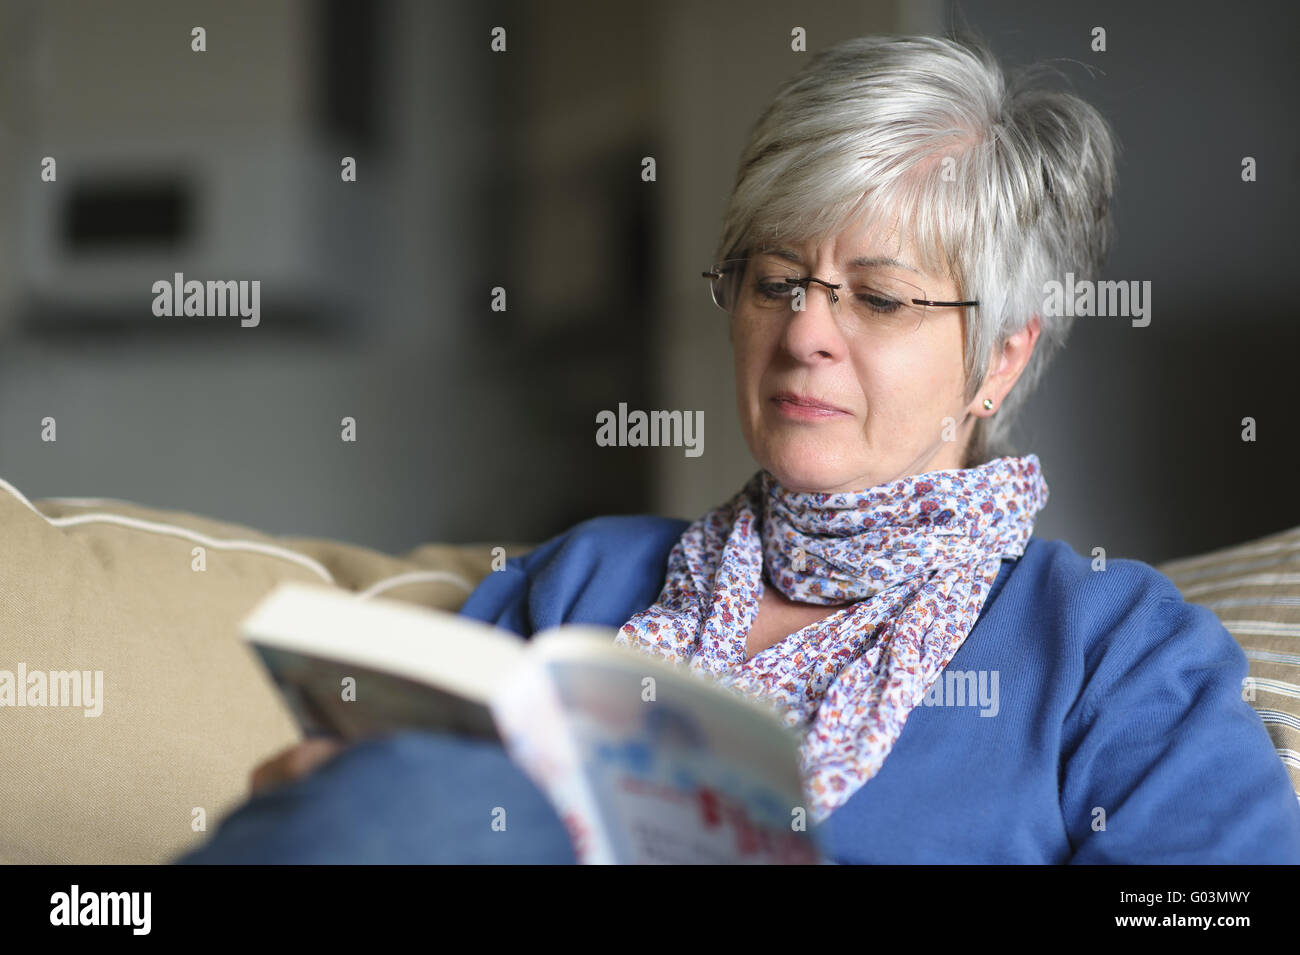 Woman sitting on a couch and reading a book Stock Photo